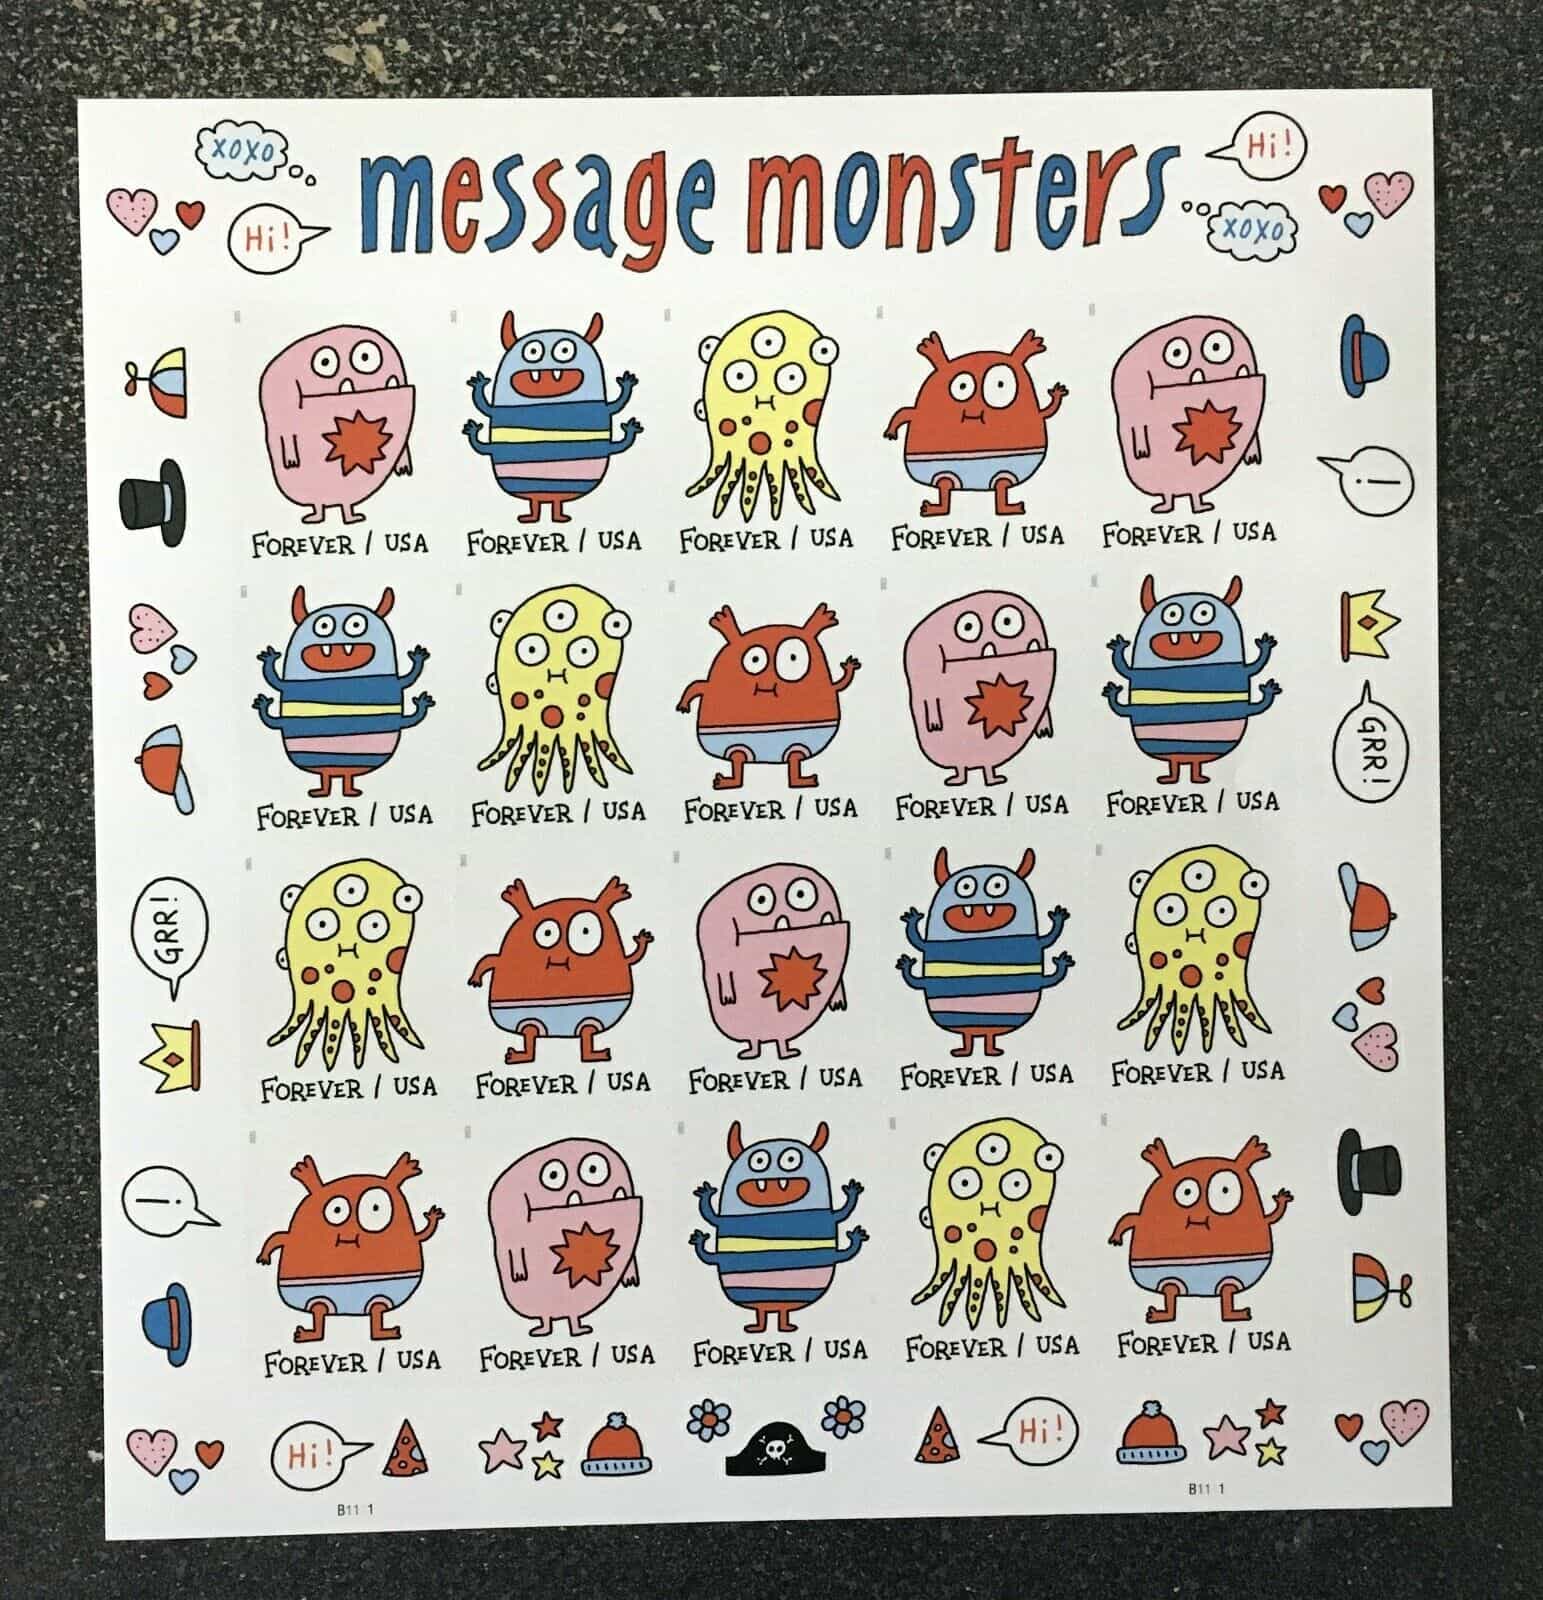 2021 USA #5636-5639 Forever Message Monsters – Sheet of 20 Stamps mint